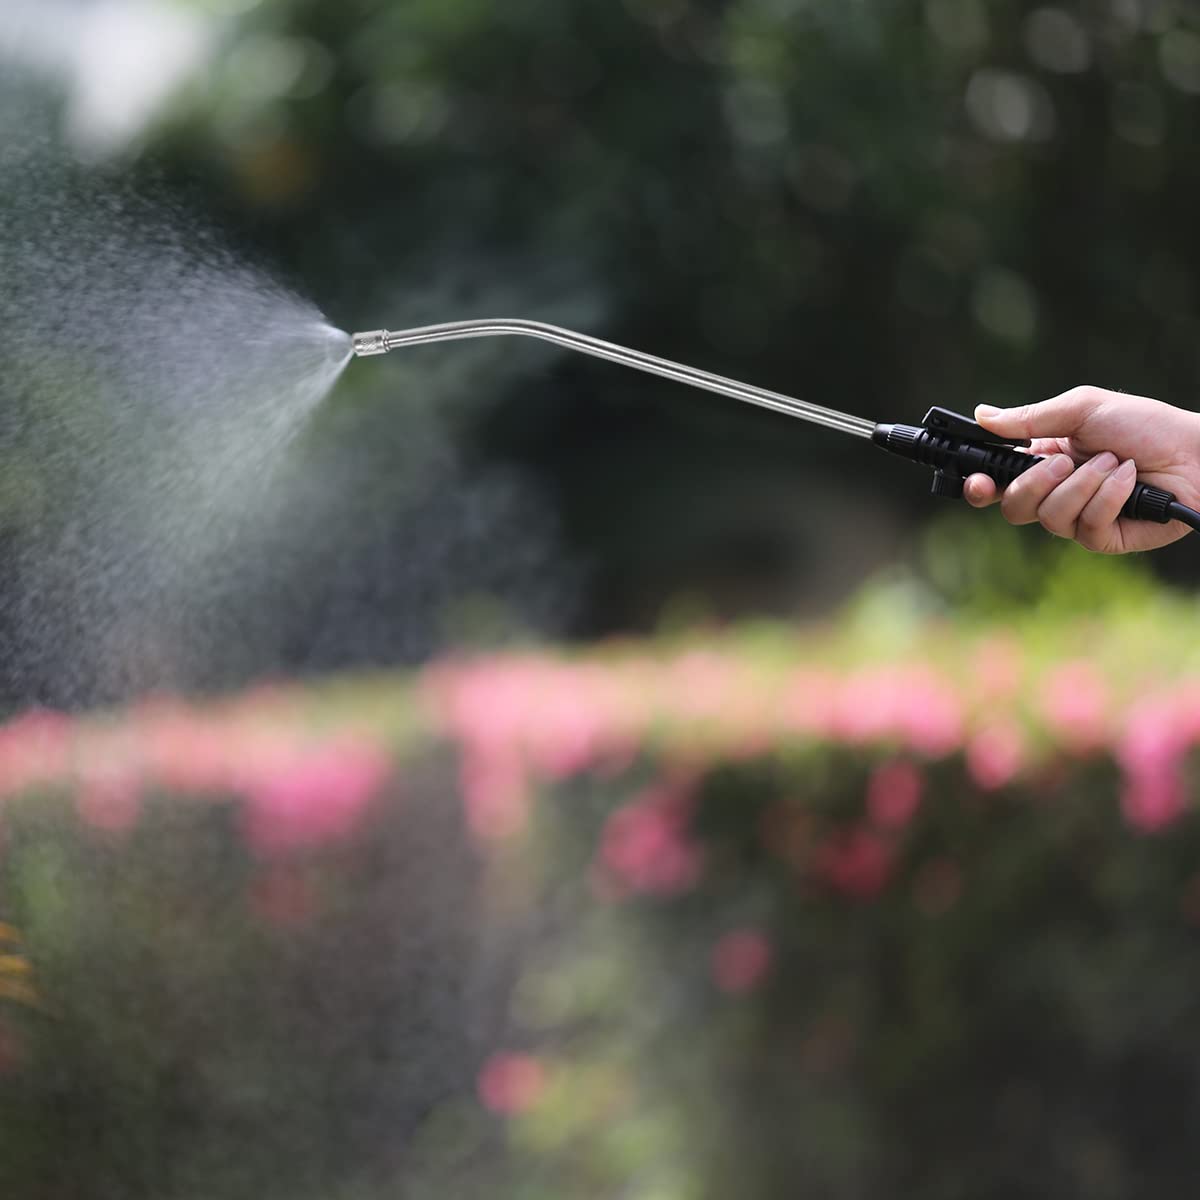 CLICIC Sprayer Universal Extended Wand with Adjustable Nozzle, Watering Sprayer Wand for Lawn and Garden Use,Stainless Steel, 16.7-27.5In